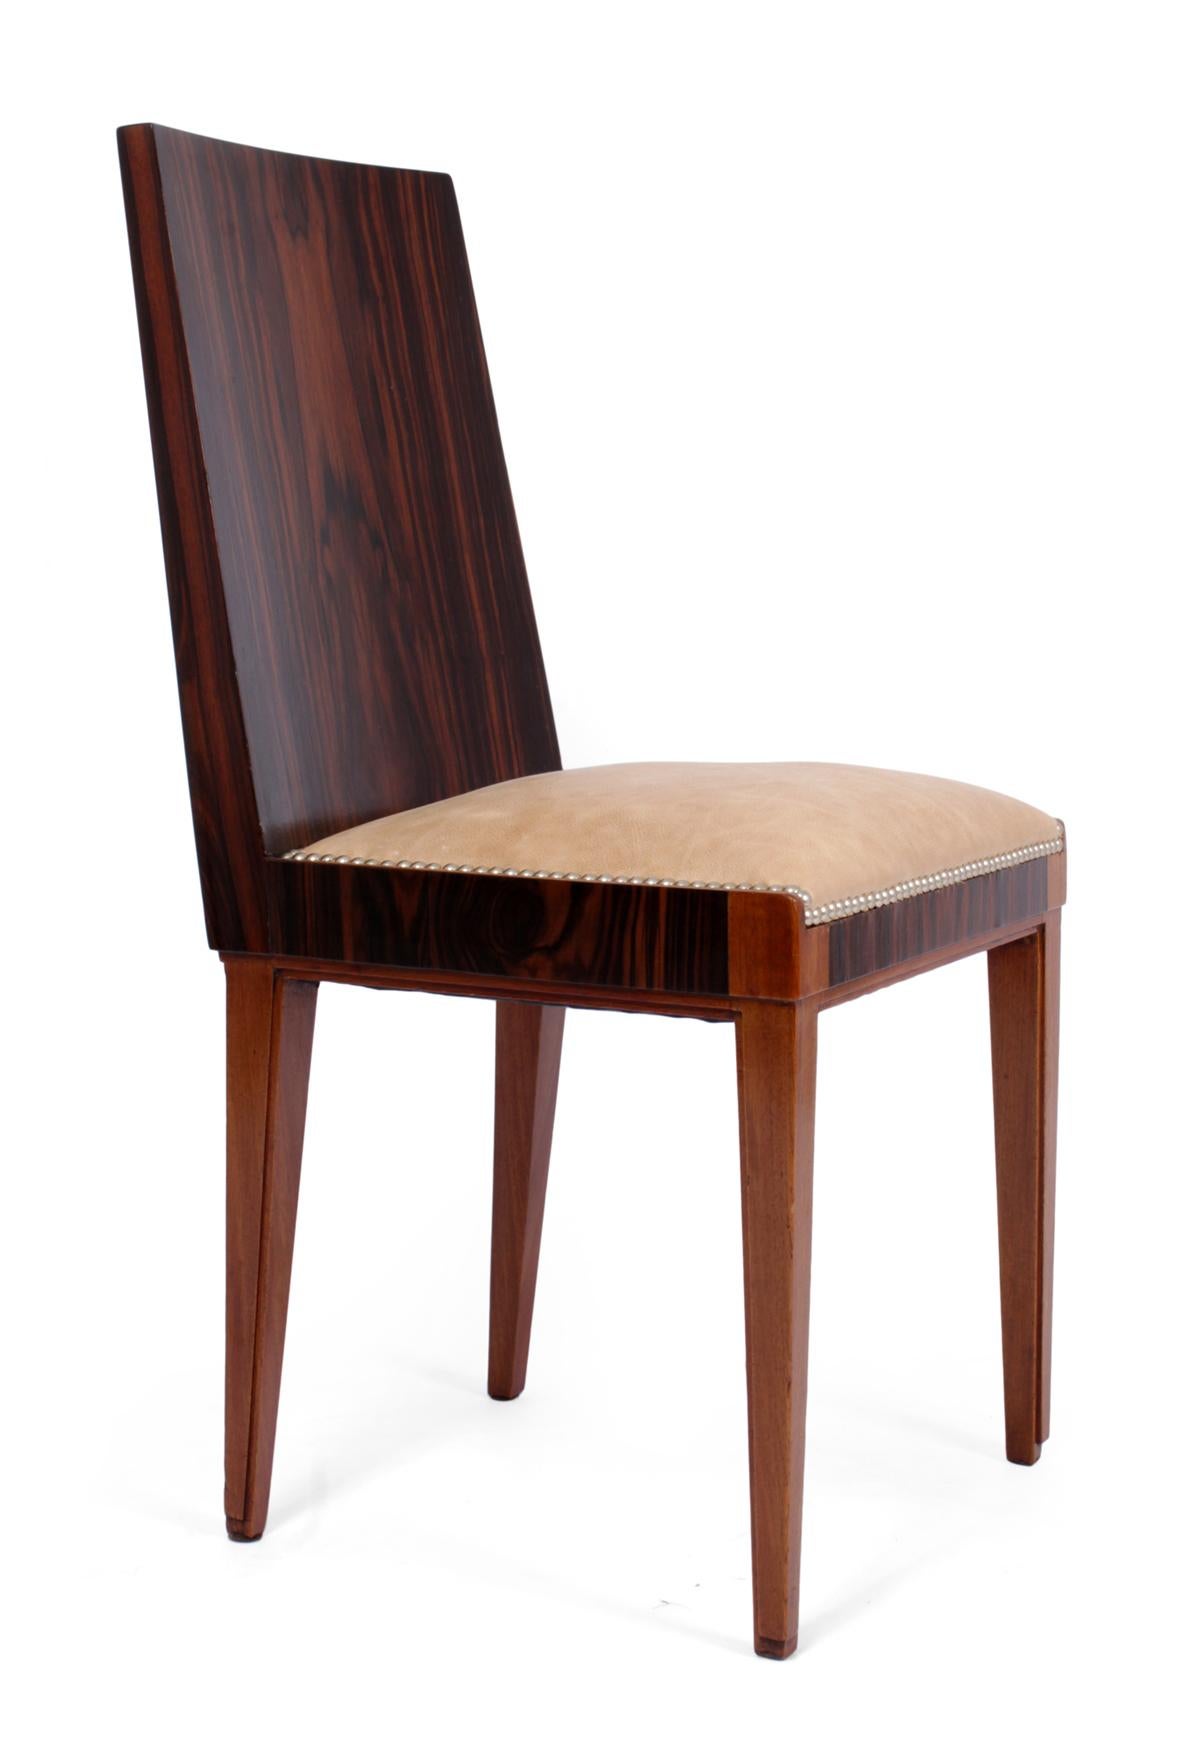 Art Deco Macassar Ebony Dining Chairs In Excellent Condition For Sale In Paddock Wood, Kent